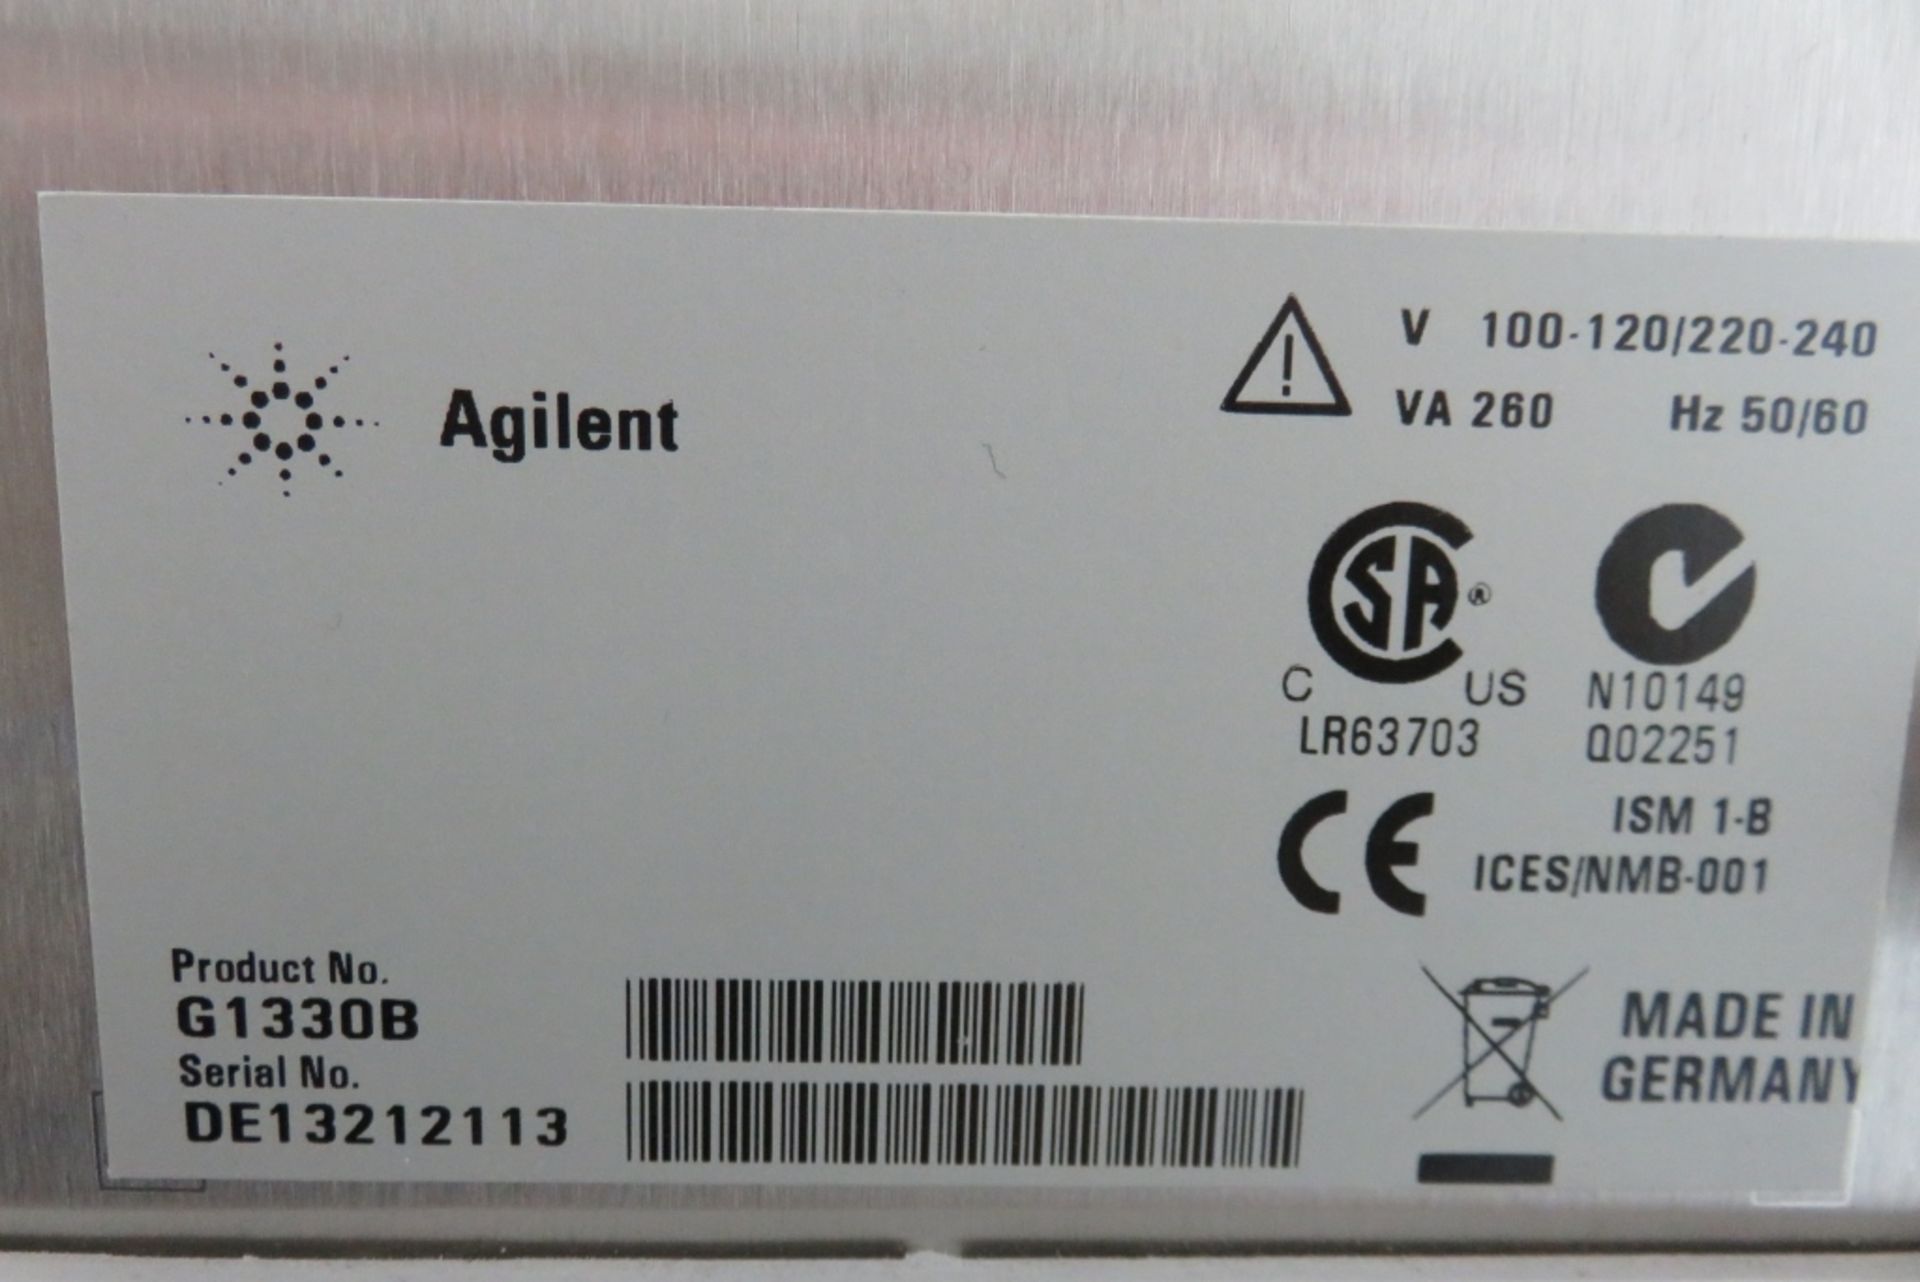 Agilent 1100 HPLC System with DAD Detector - Image 10 of 16